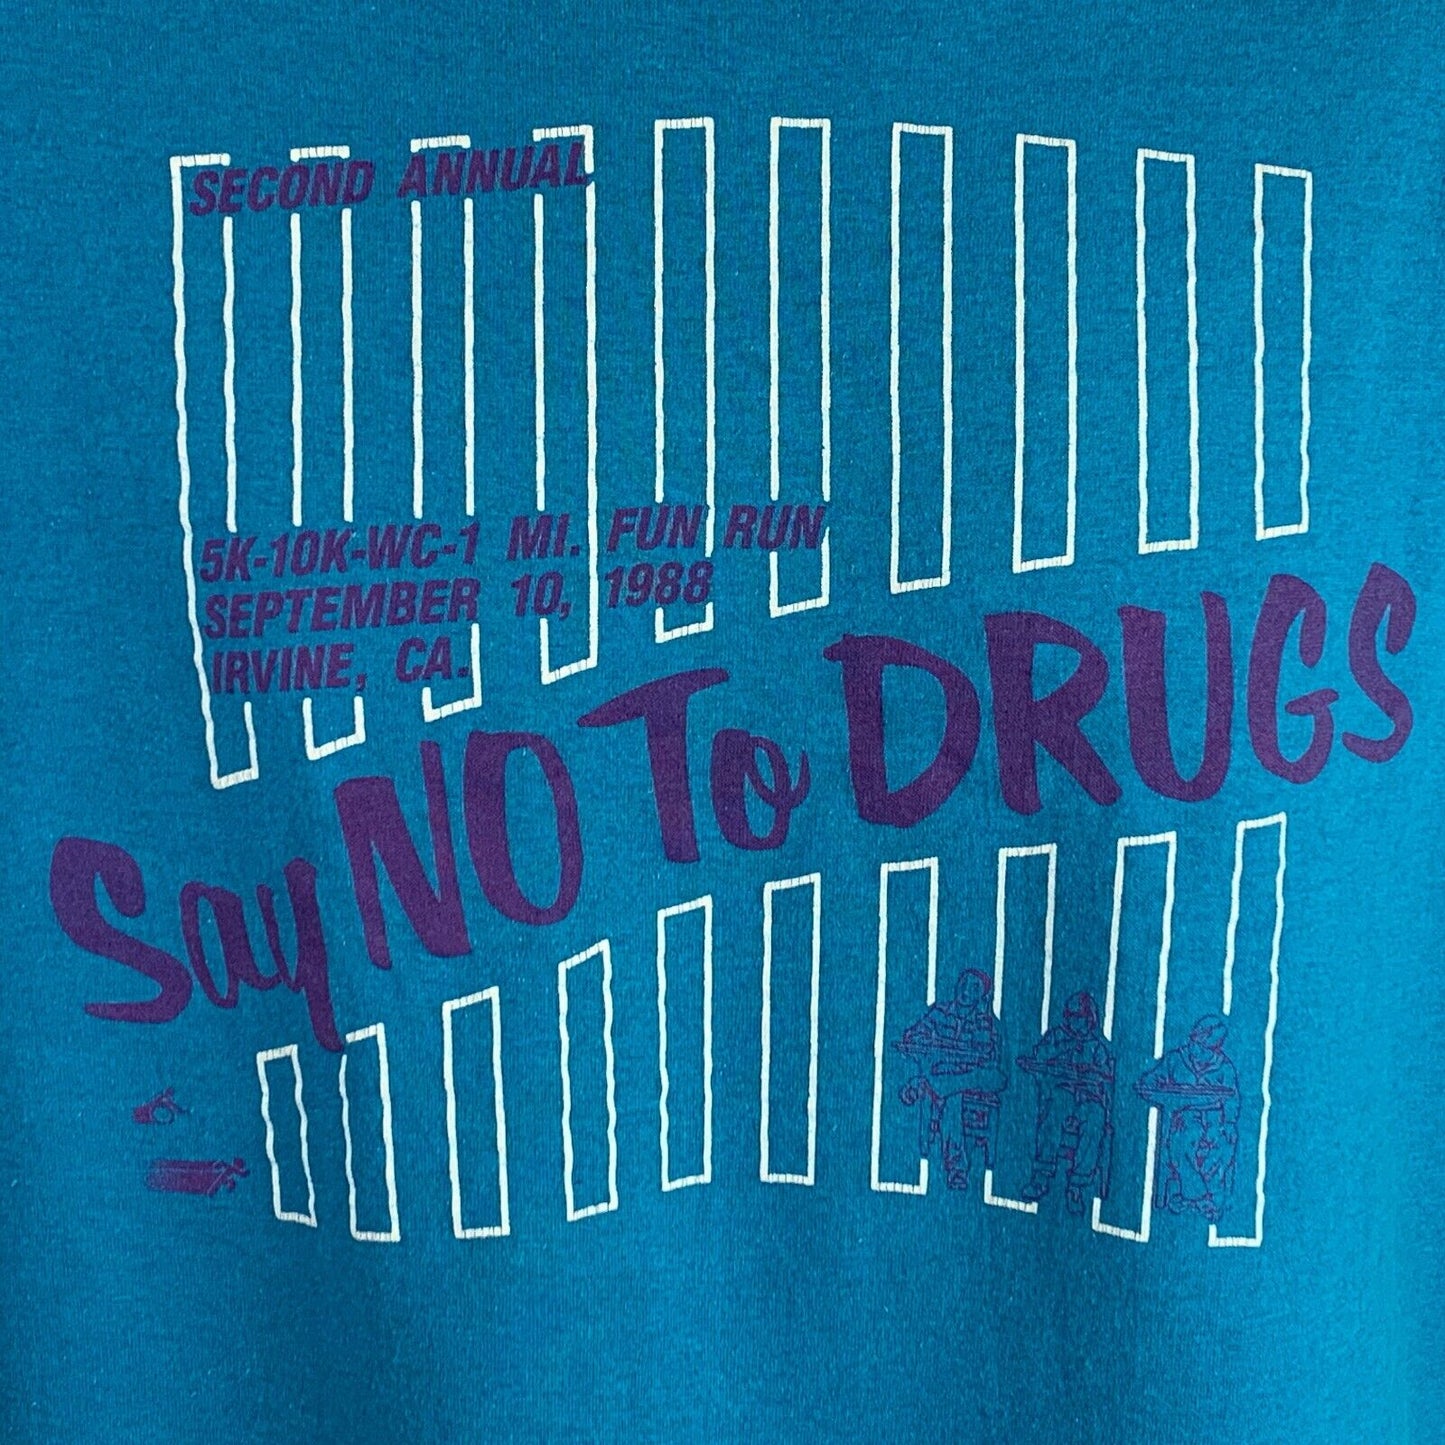 Say No To Drugs Fun Run Vintage 80s T Shirt Irvine California Made In USA Large